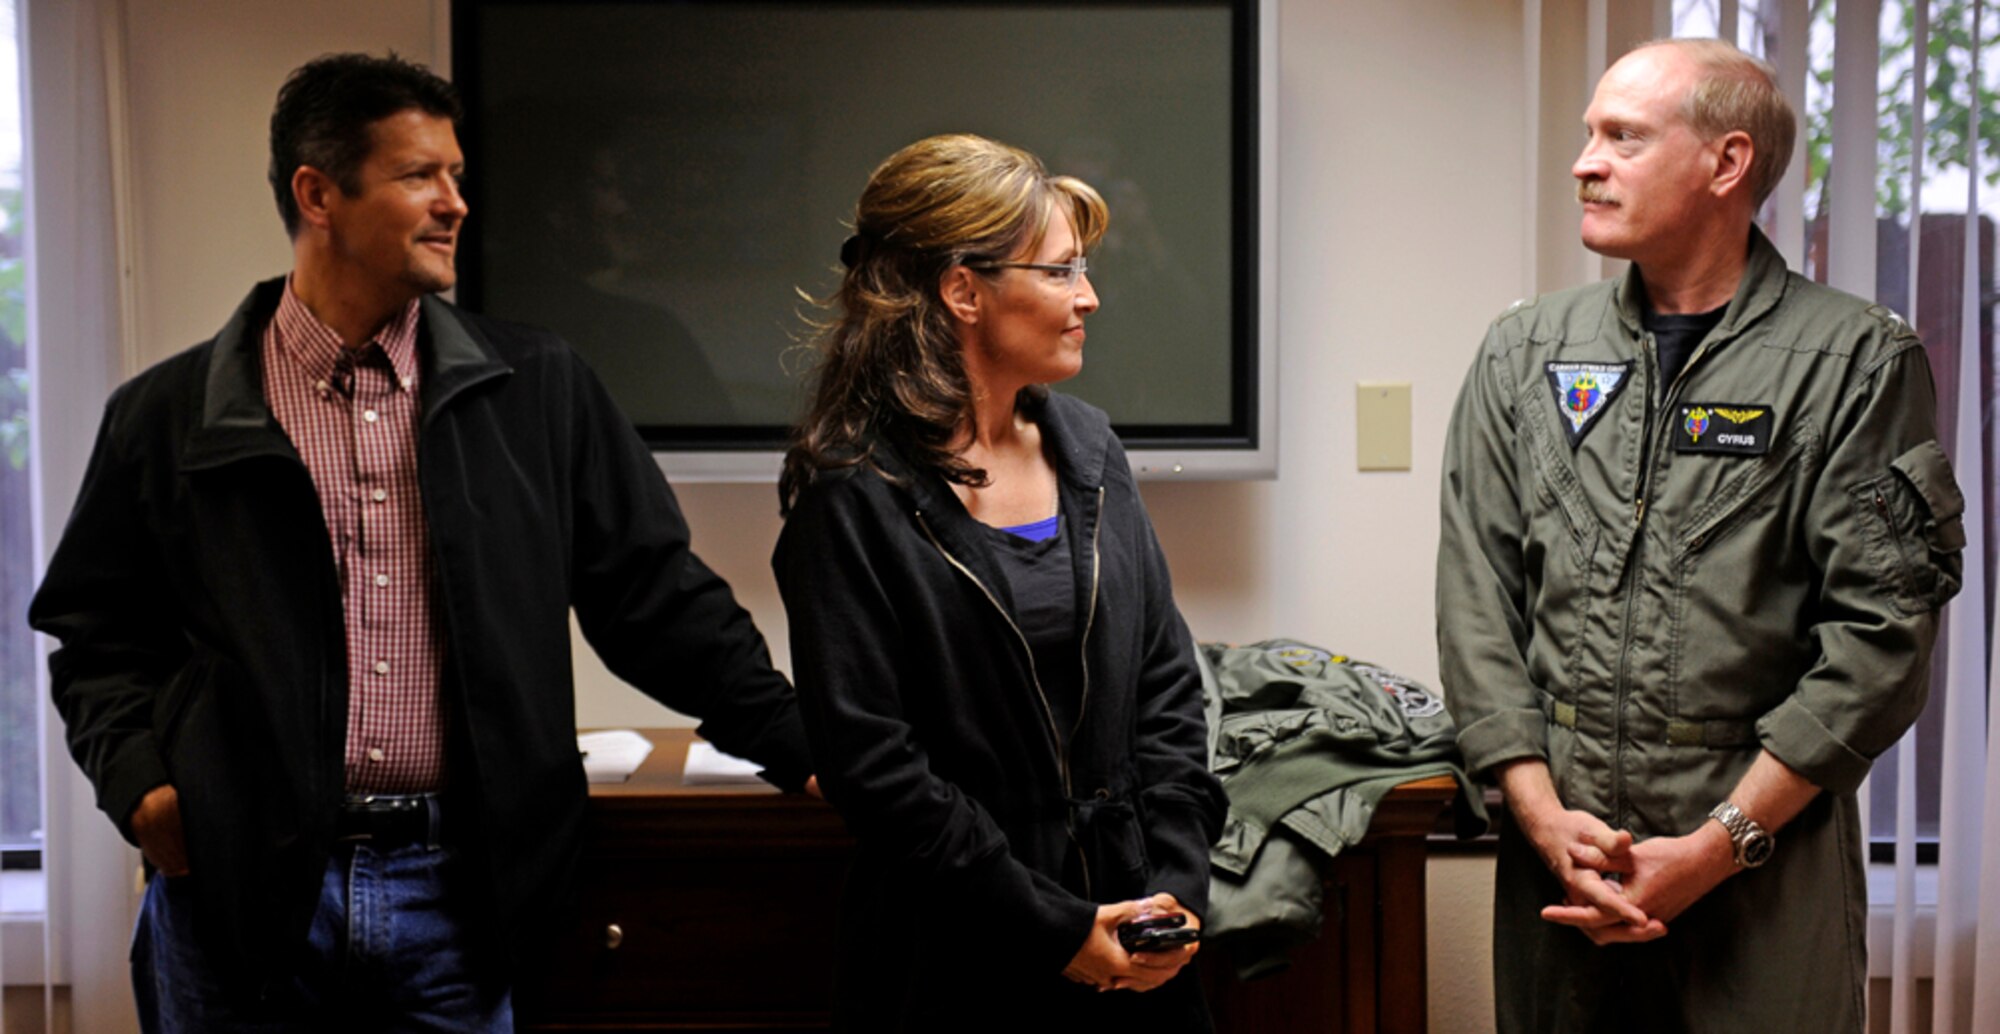 Alaska Governor Sarah Palin and her husband Todd meet with Rear Admiral Mark A. Vance, USS John C. Stennis (CVN 74) Strike Group Commander, before loading onto a C-2A Greyhound logistics aircraft  that will be taking them out to USS John C. Stennis (CVN 74) during exercise Northern Edge 2009, Elmendorf AFB, Alaska, June 18, 2009.  Northern Edge 2009 is Alaska's largest military training exercise.  It prepares joint forces to respond to crises throughout the Asia-Pacific region.  (Released/U.S. Air Force photo by TSgt Dennis J. Henry Jr.)
